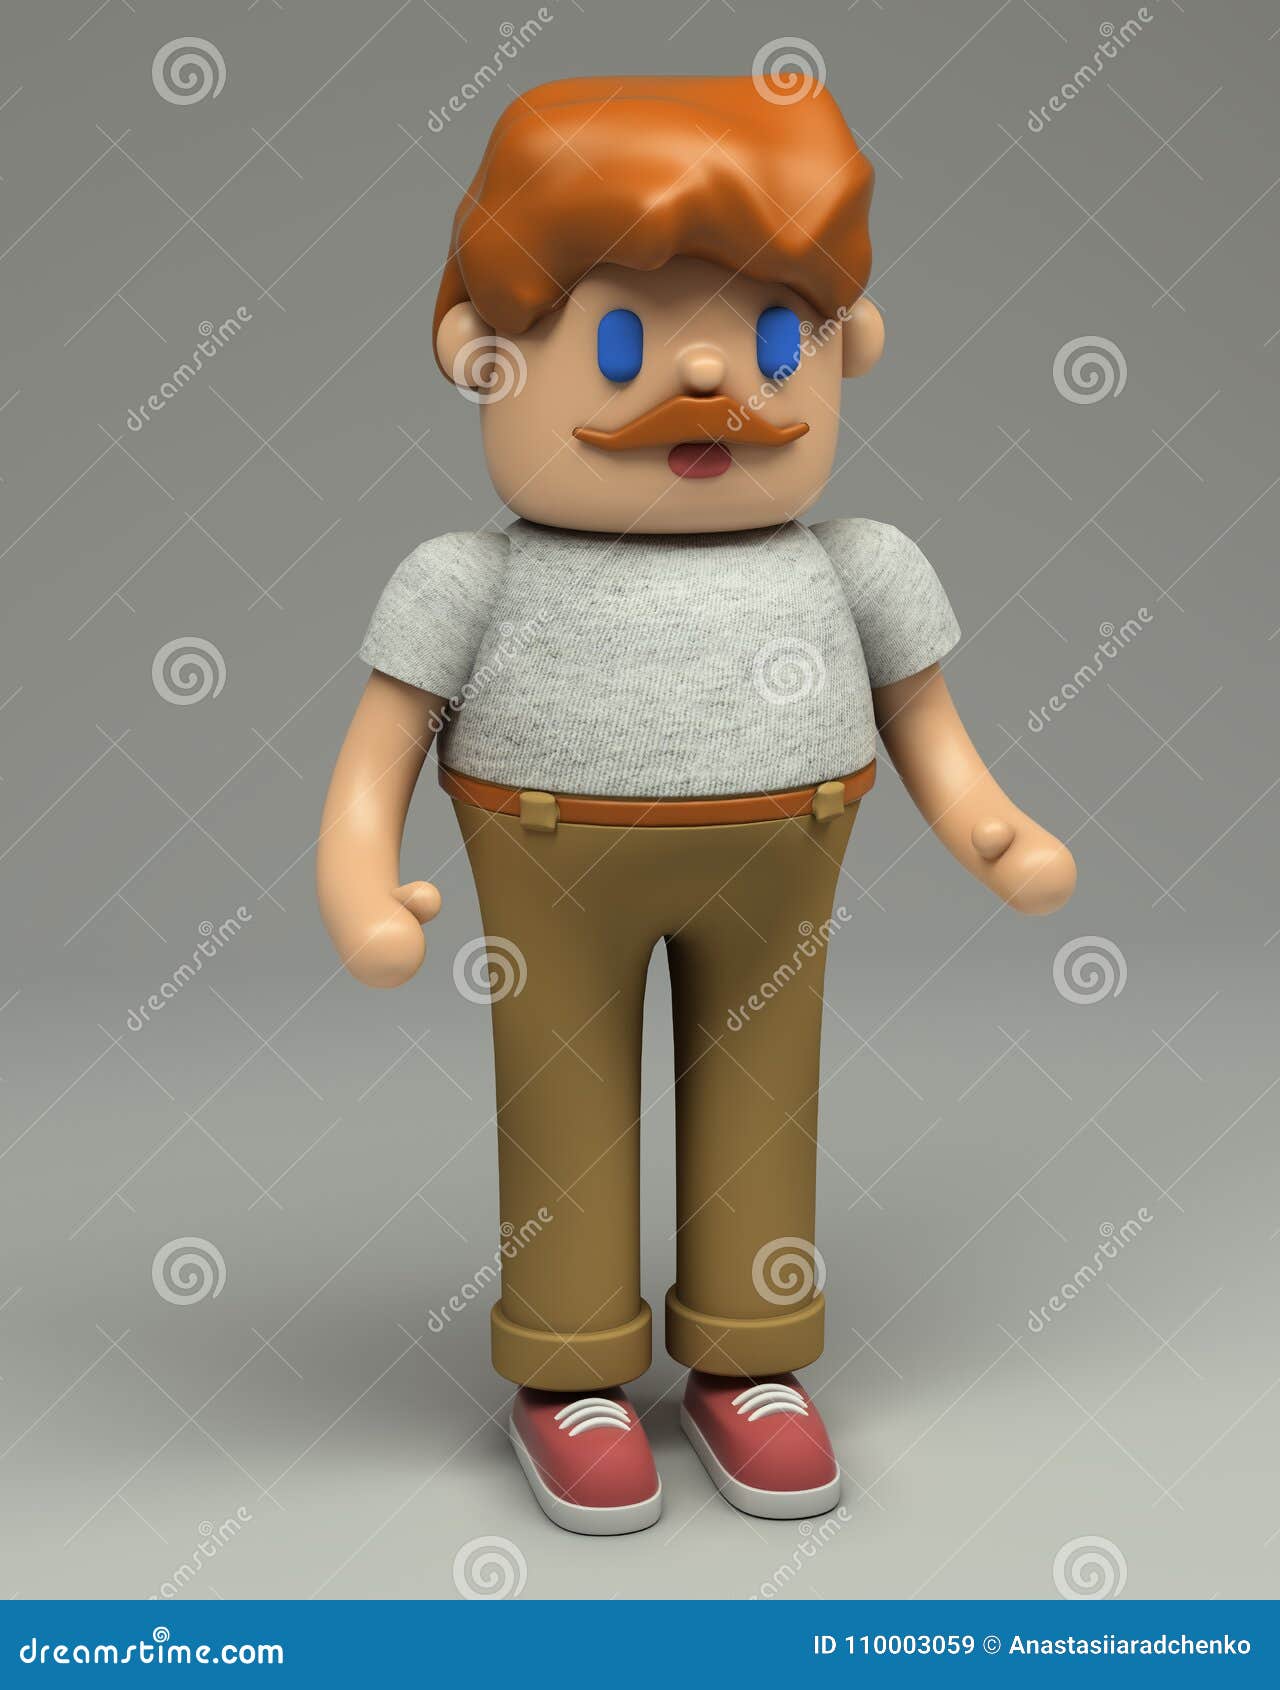 3d Rendering of Male Cartoon Character Stock Illustration - Illustration of  cute, icon: 110003059